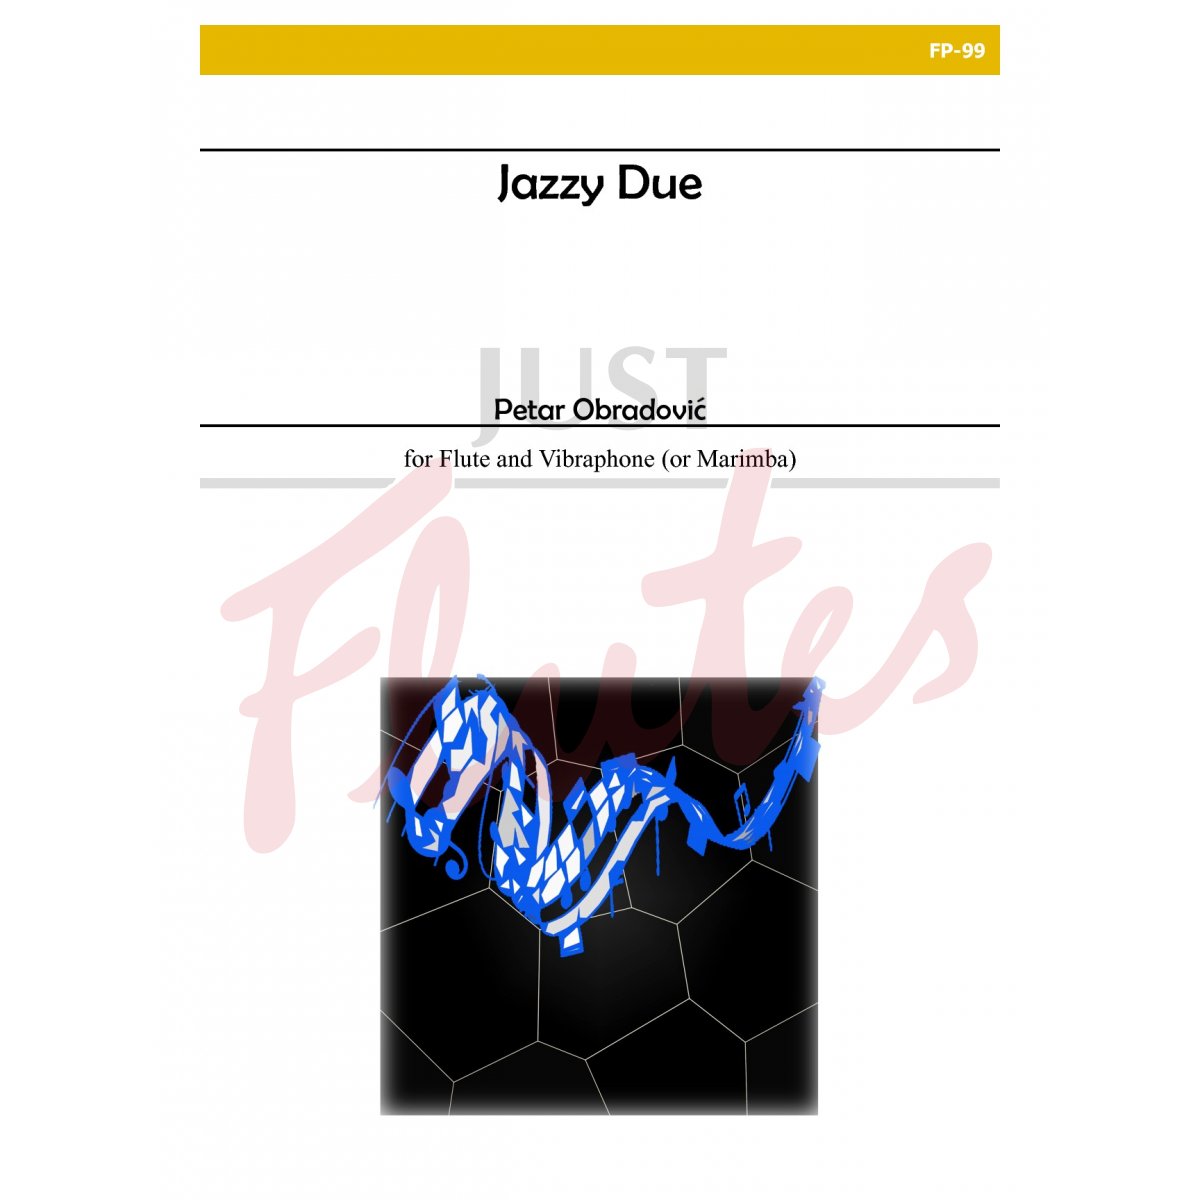 Jazzy Due for Flute and Vibraphone